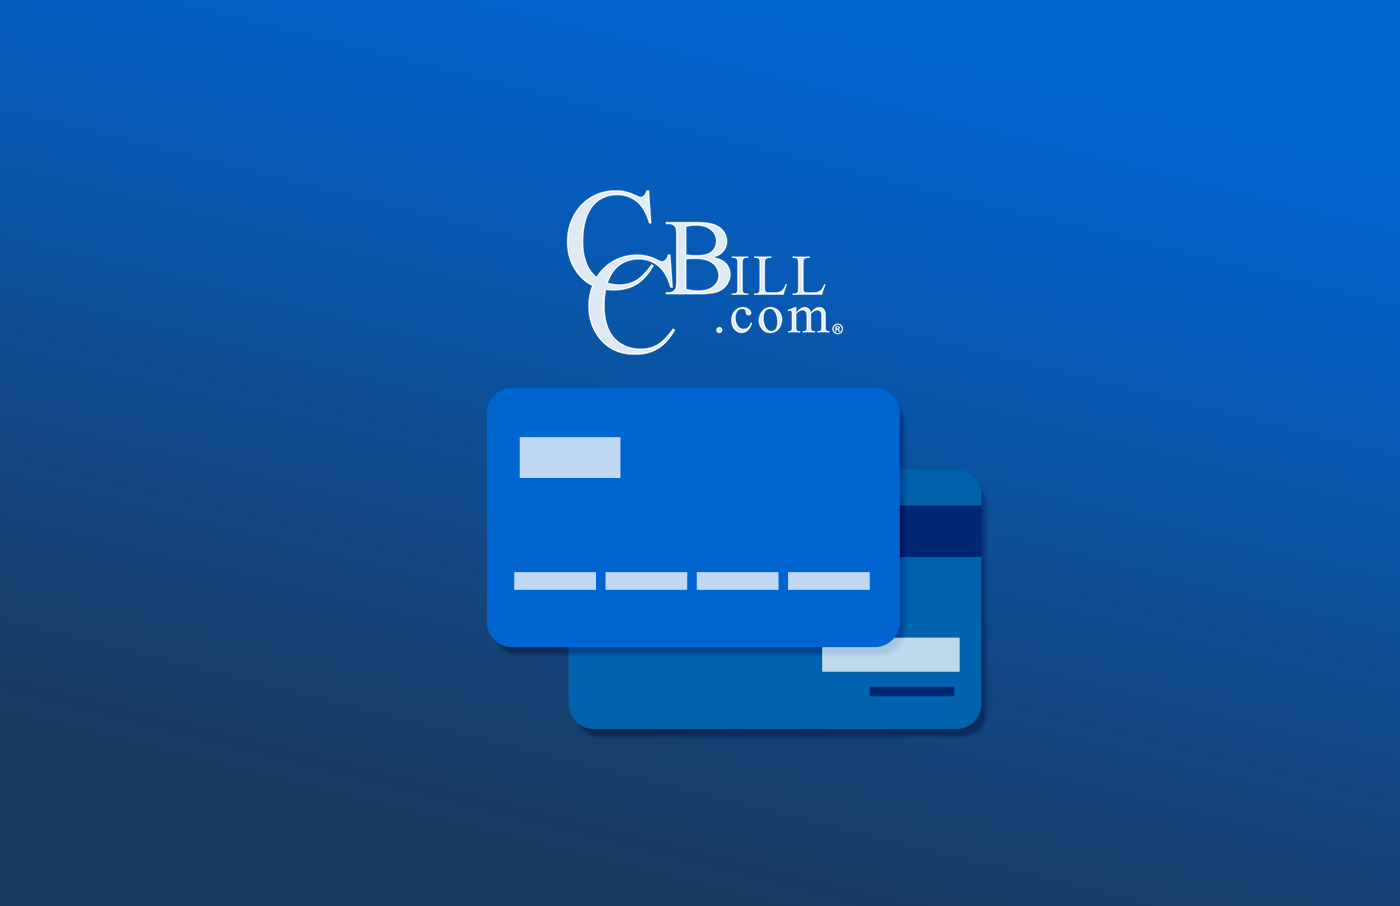 CCBill payment gateway for your online business